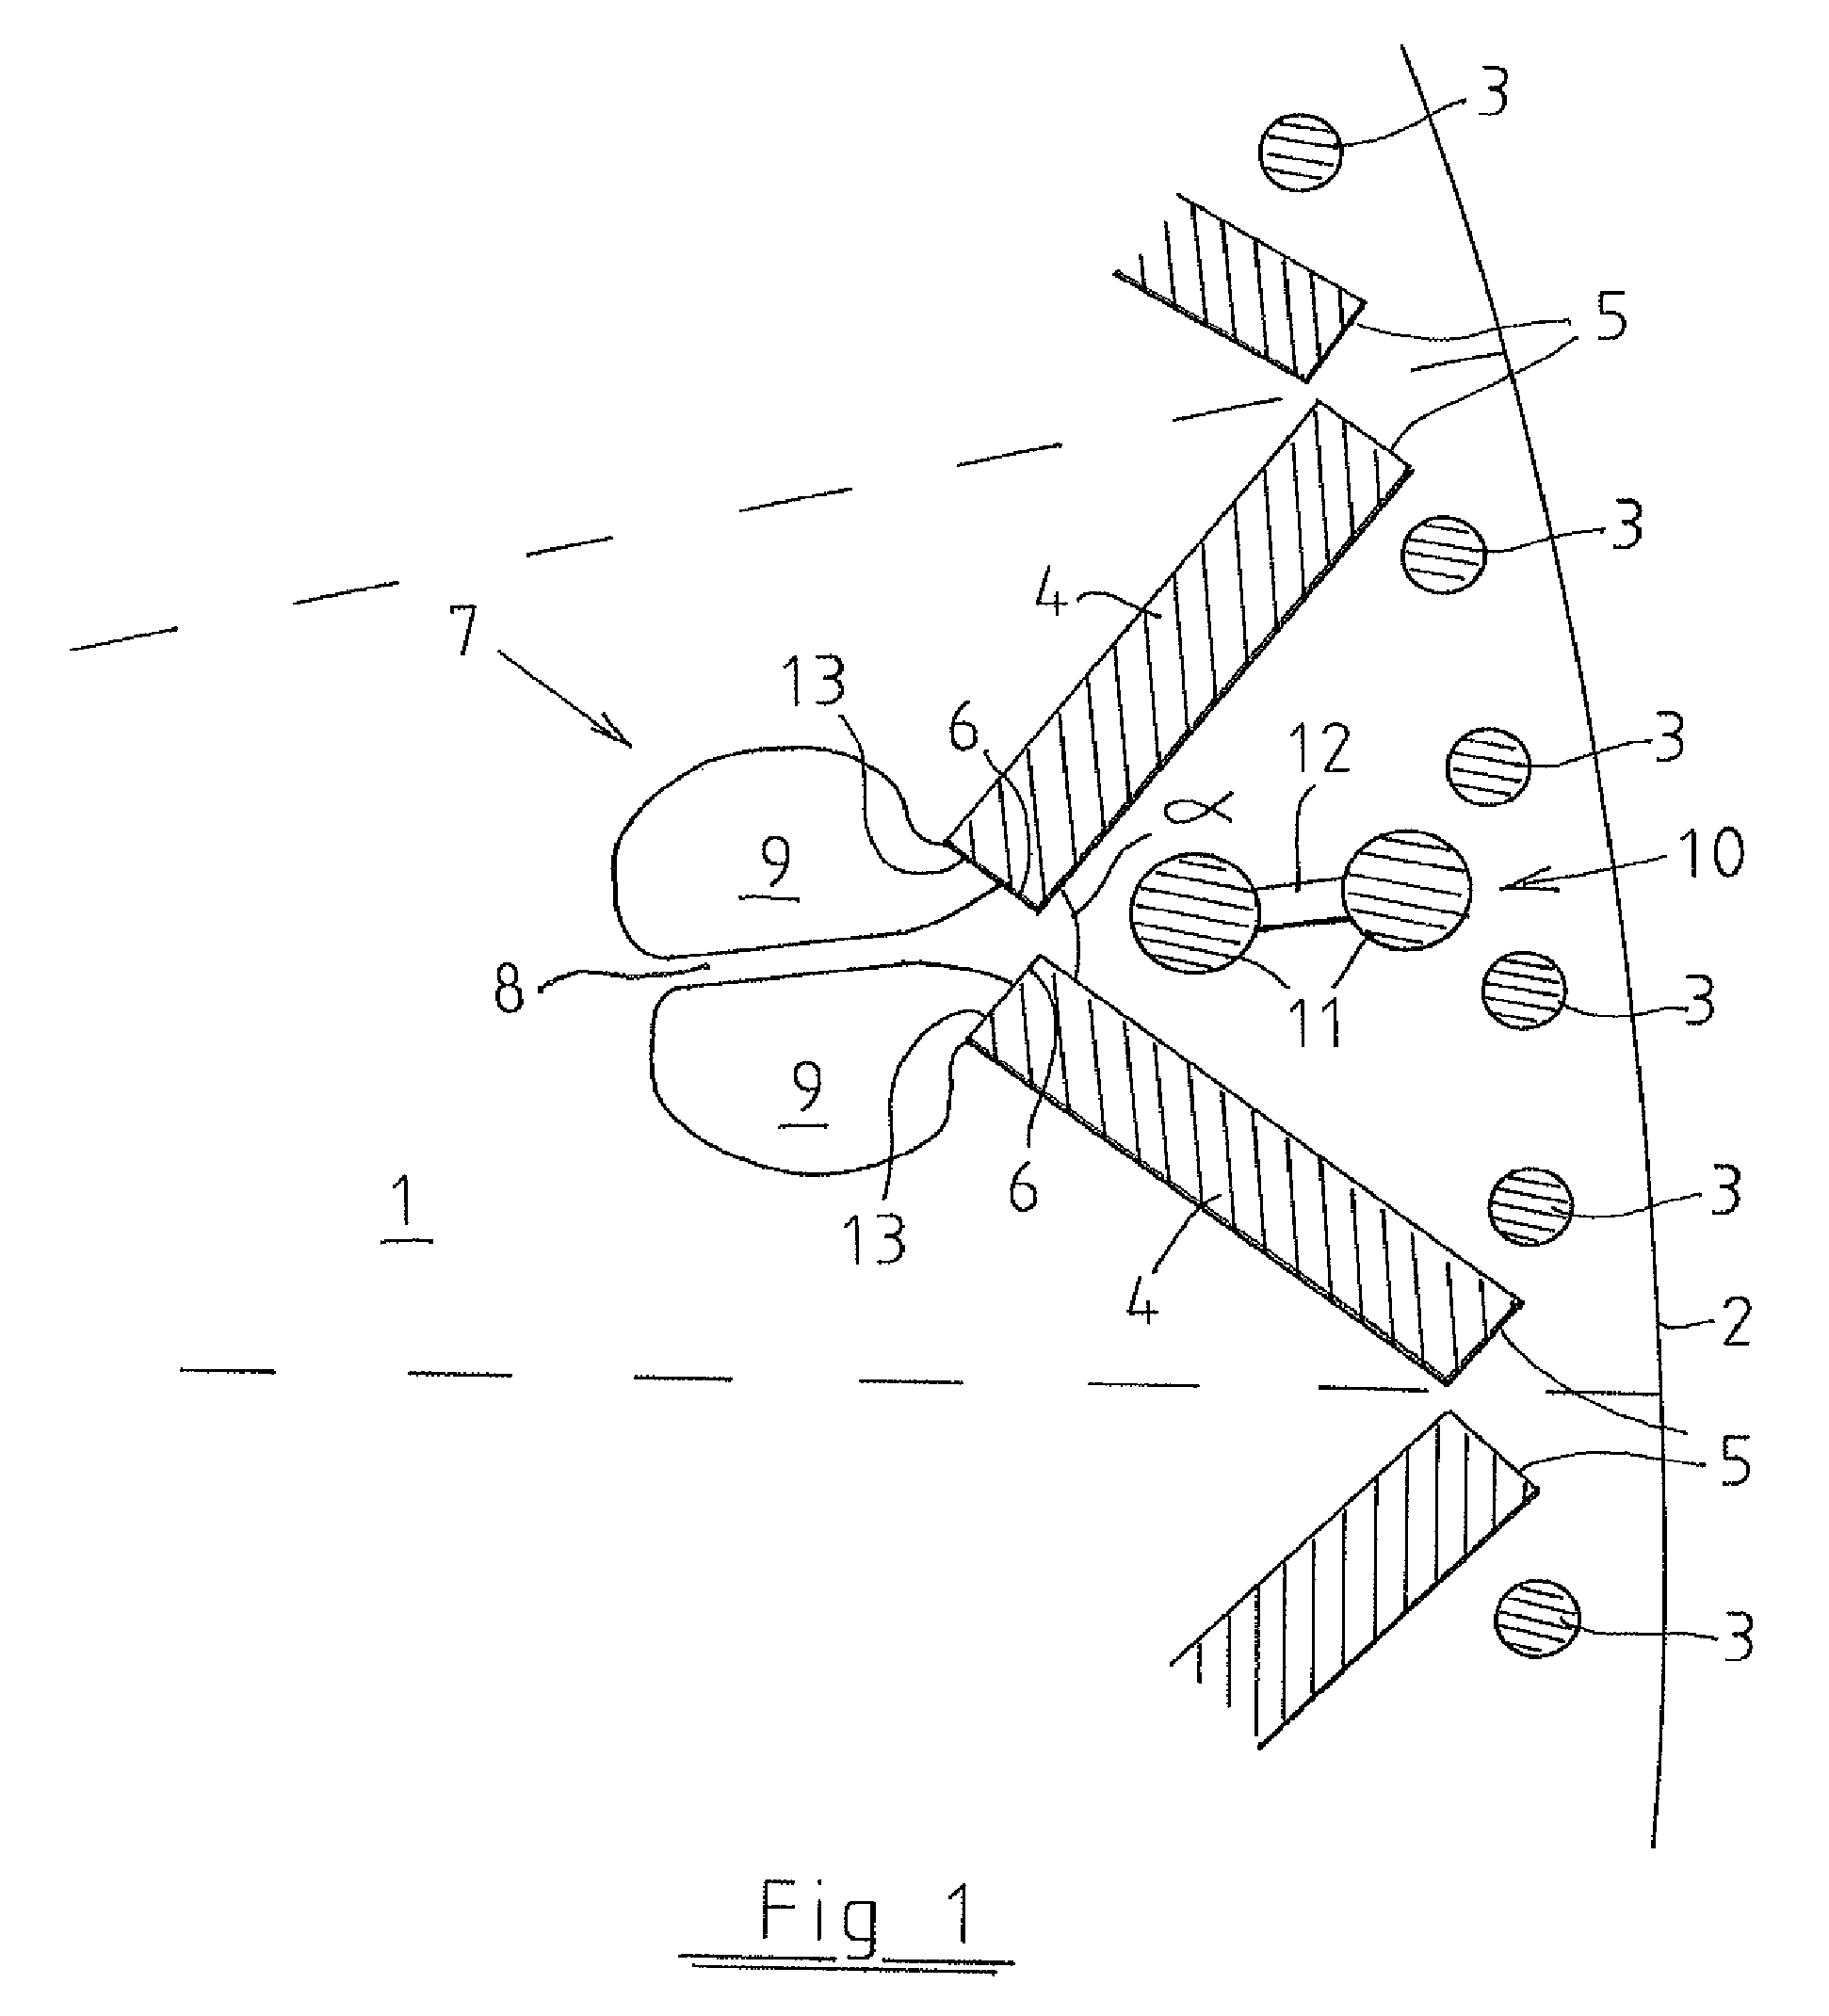 Laminated rotor structure for a permanent magnet synchronous machine